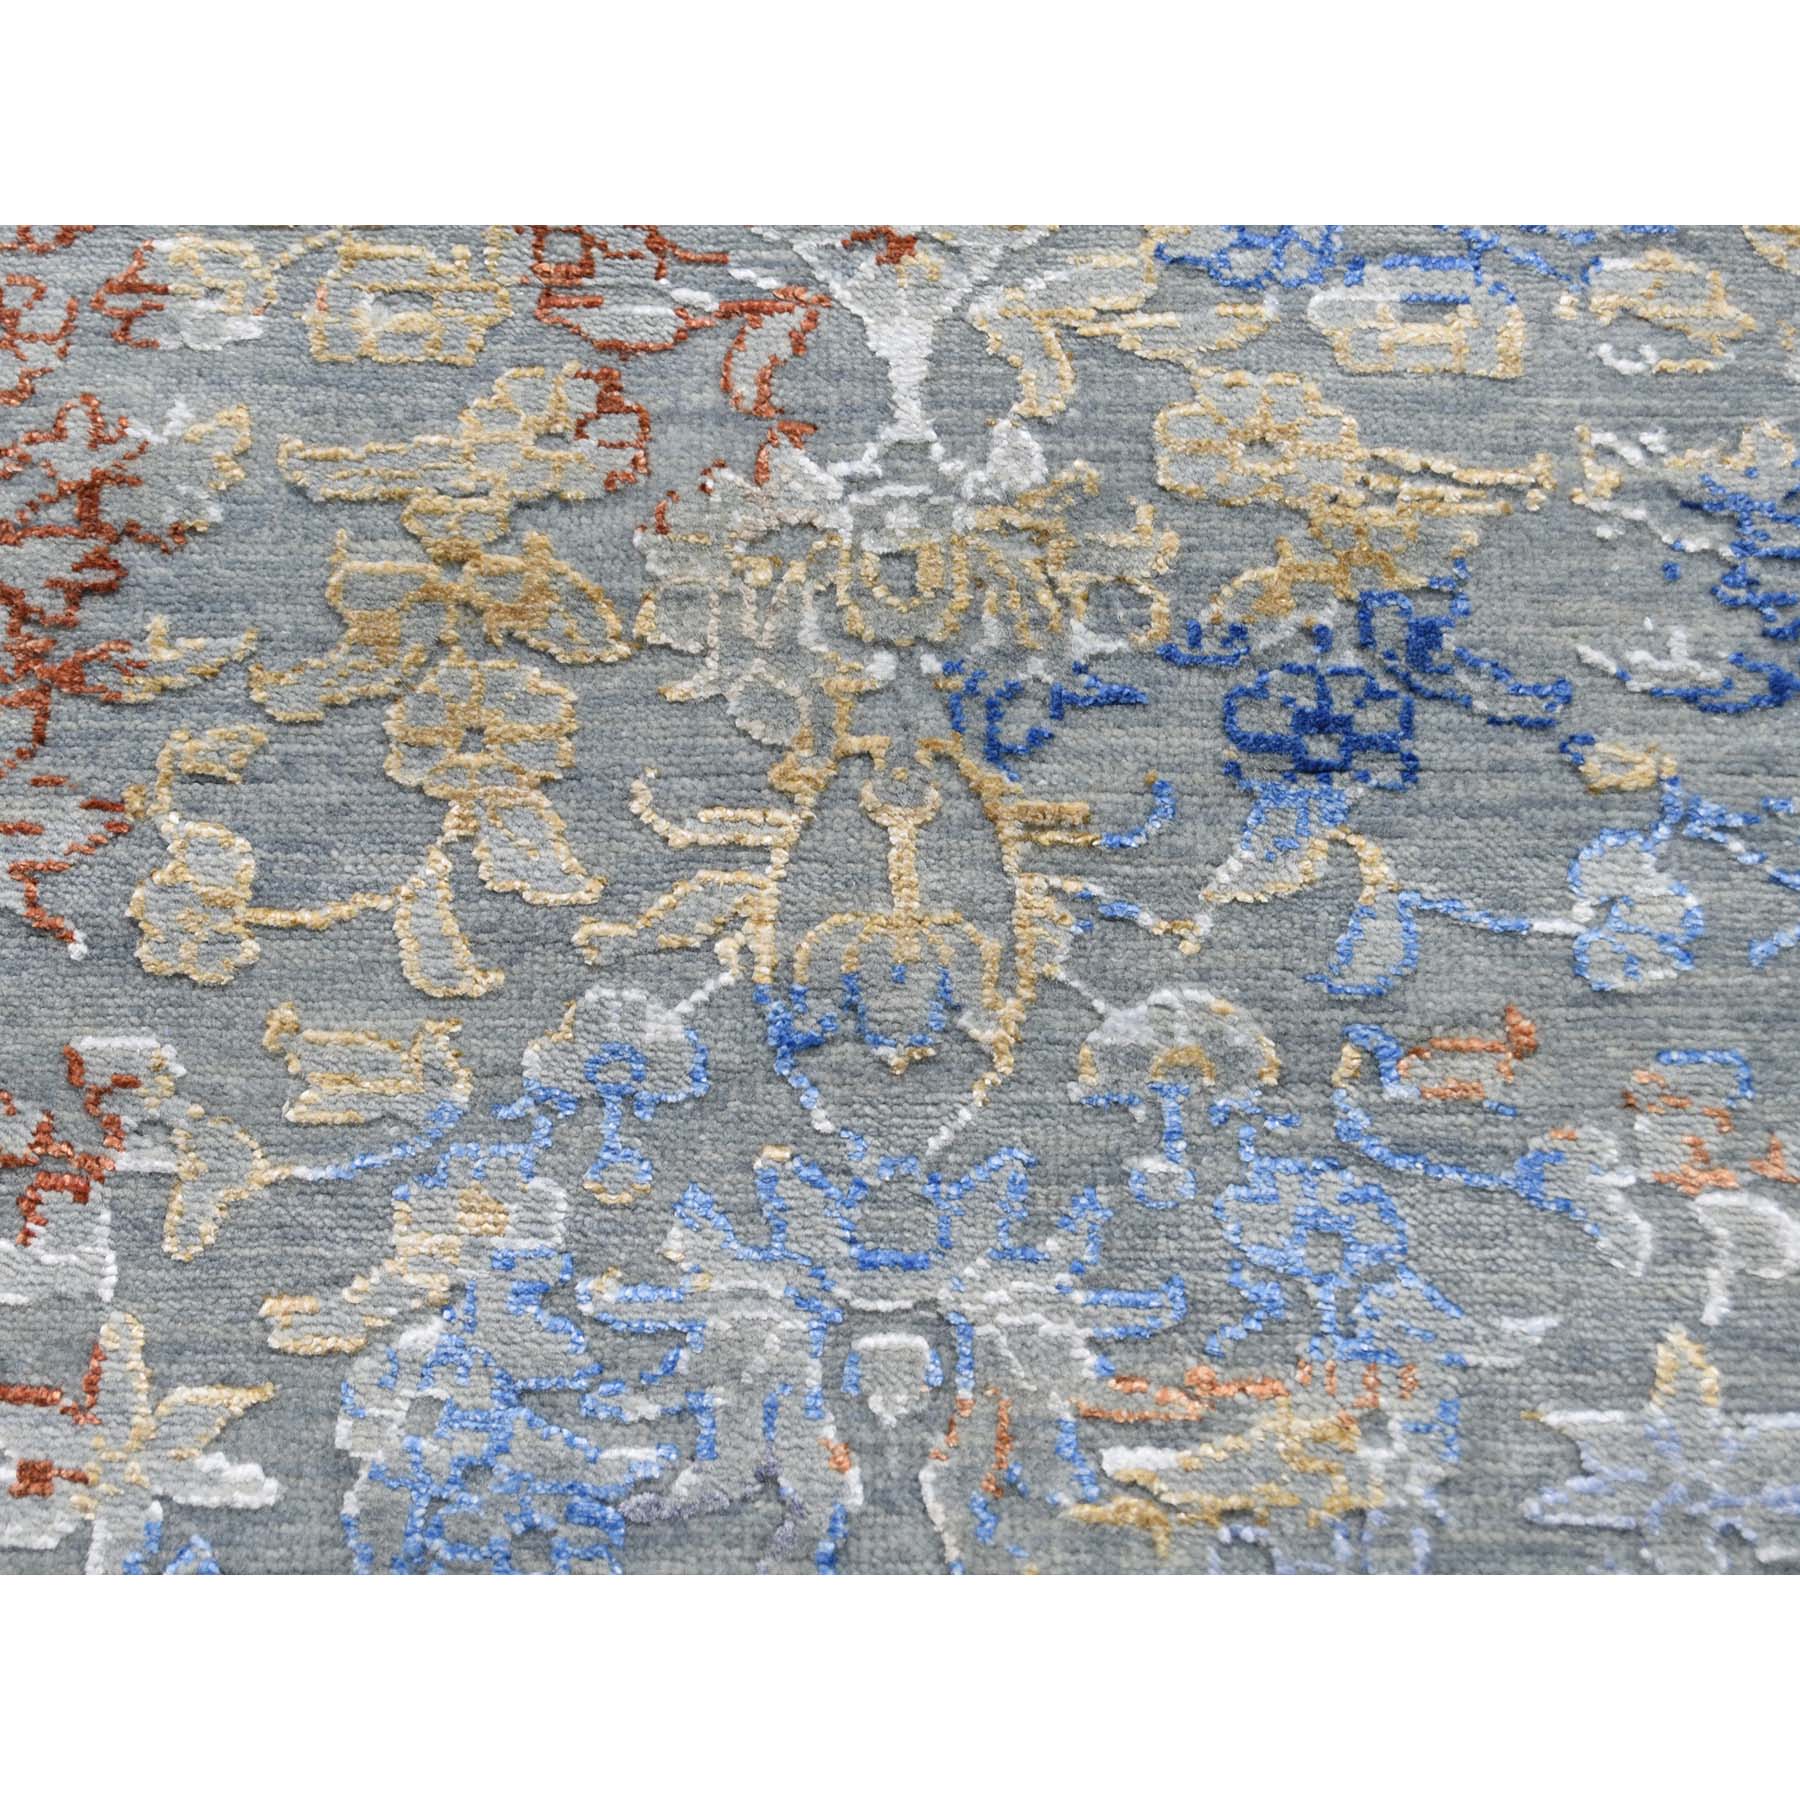 9-x12- Blue Flower Design Wool And Silk Hand-Knotted Oriental Rug 